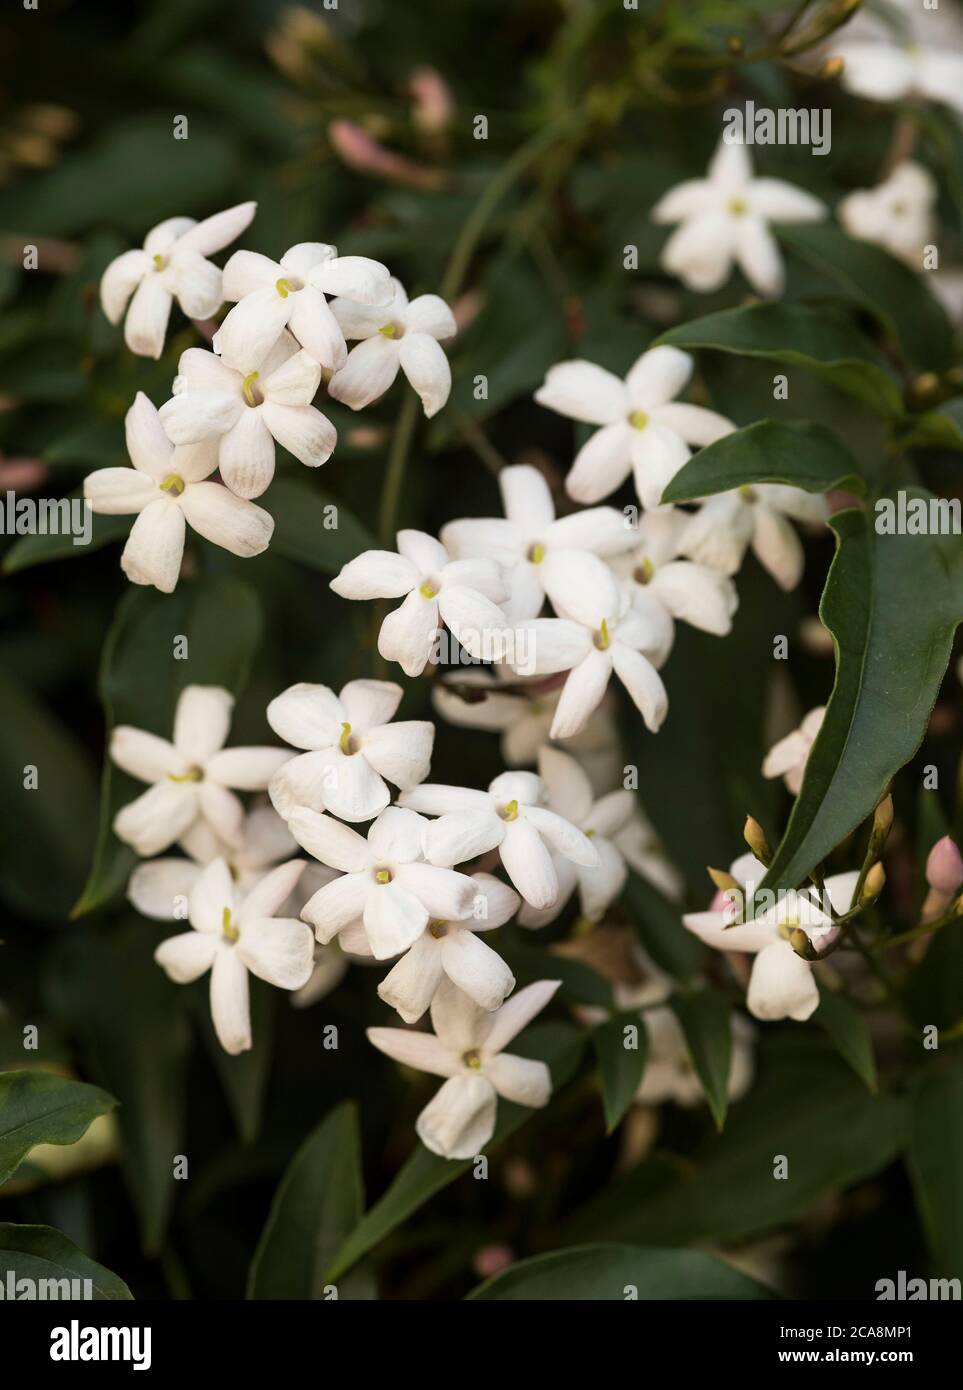 Jasminum officinale, common Jasmine. A close up of fragrant Jasmine flowers, a genus of shrubs and vines in the olive family. Deciduous or evergreen. Stock Photo